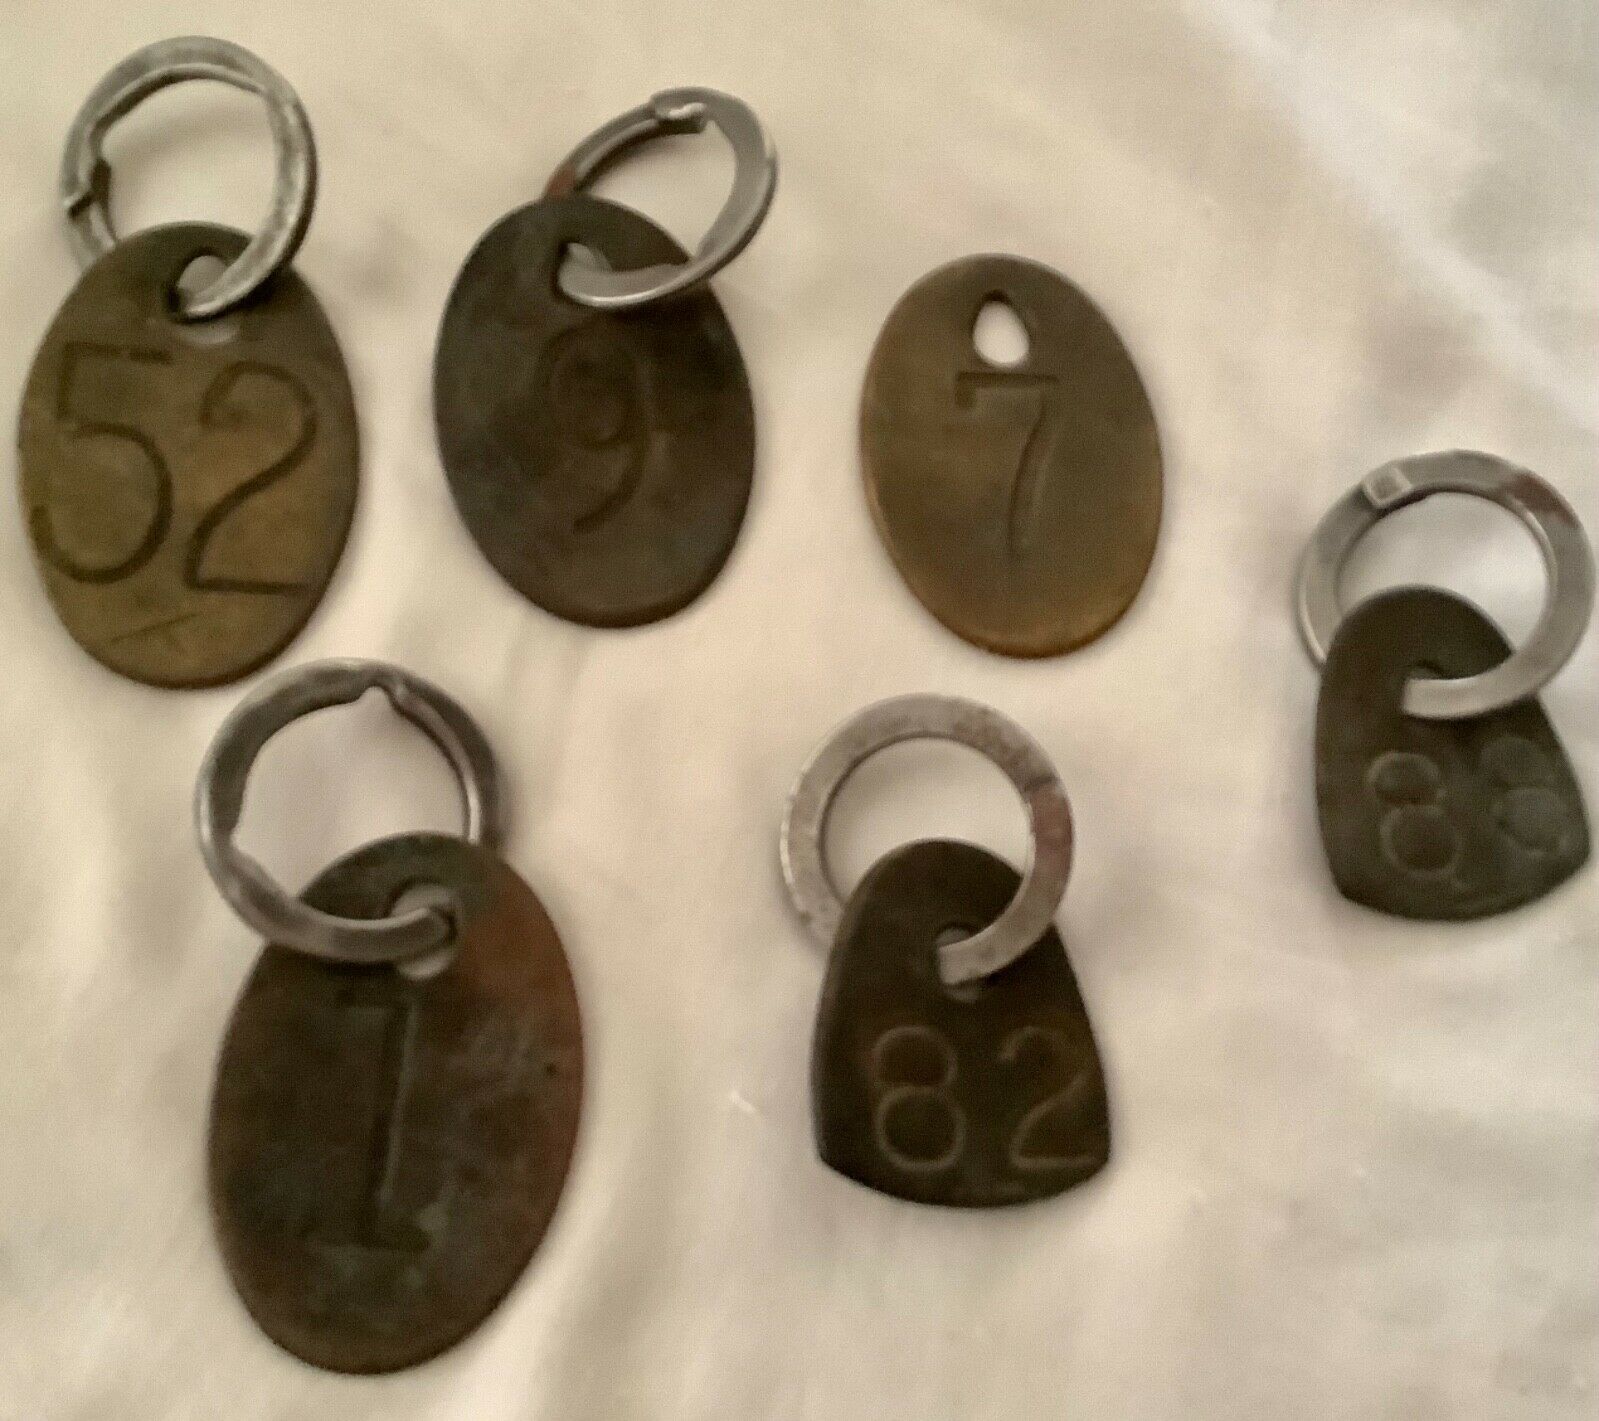 lot of 6 vintage brass livestock cow number tags